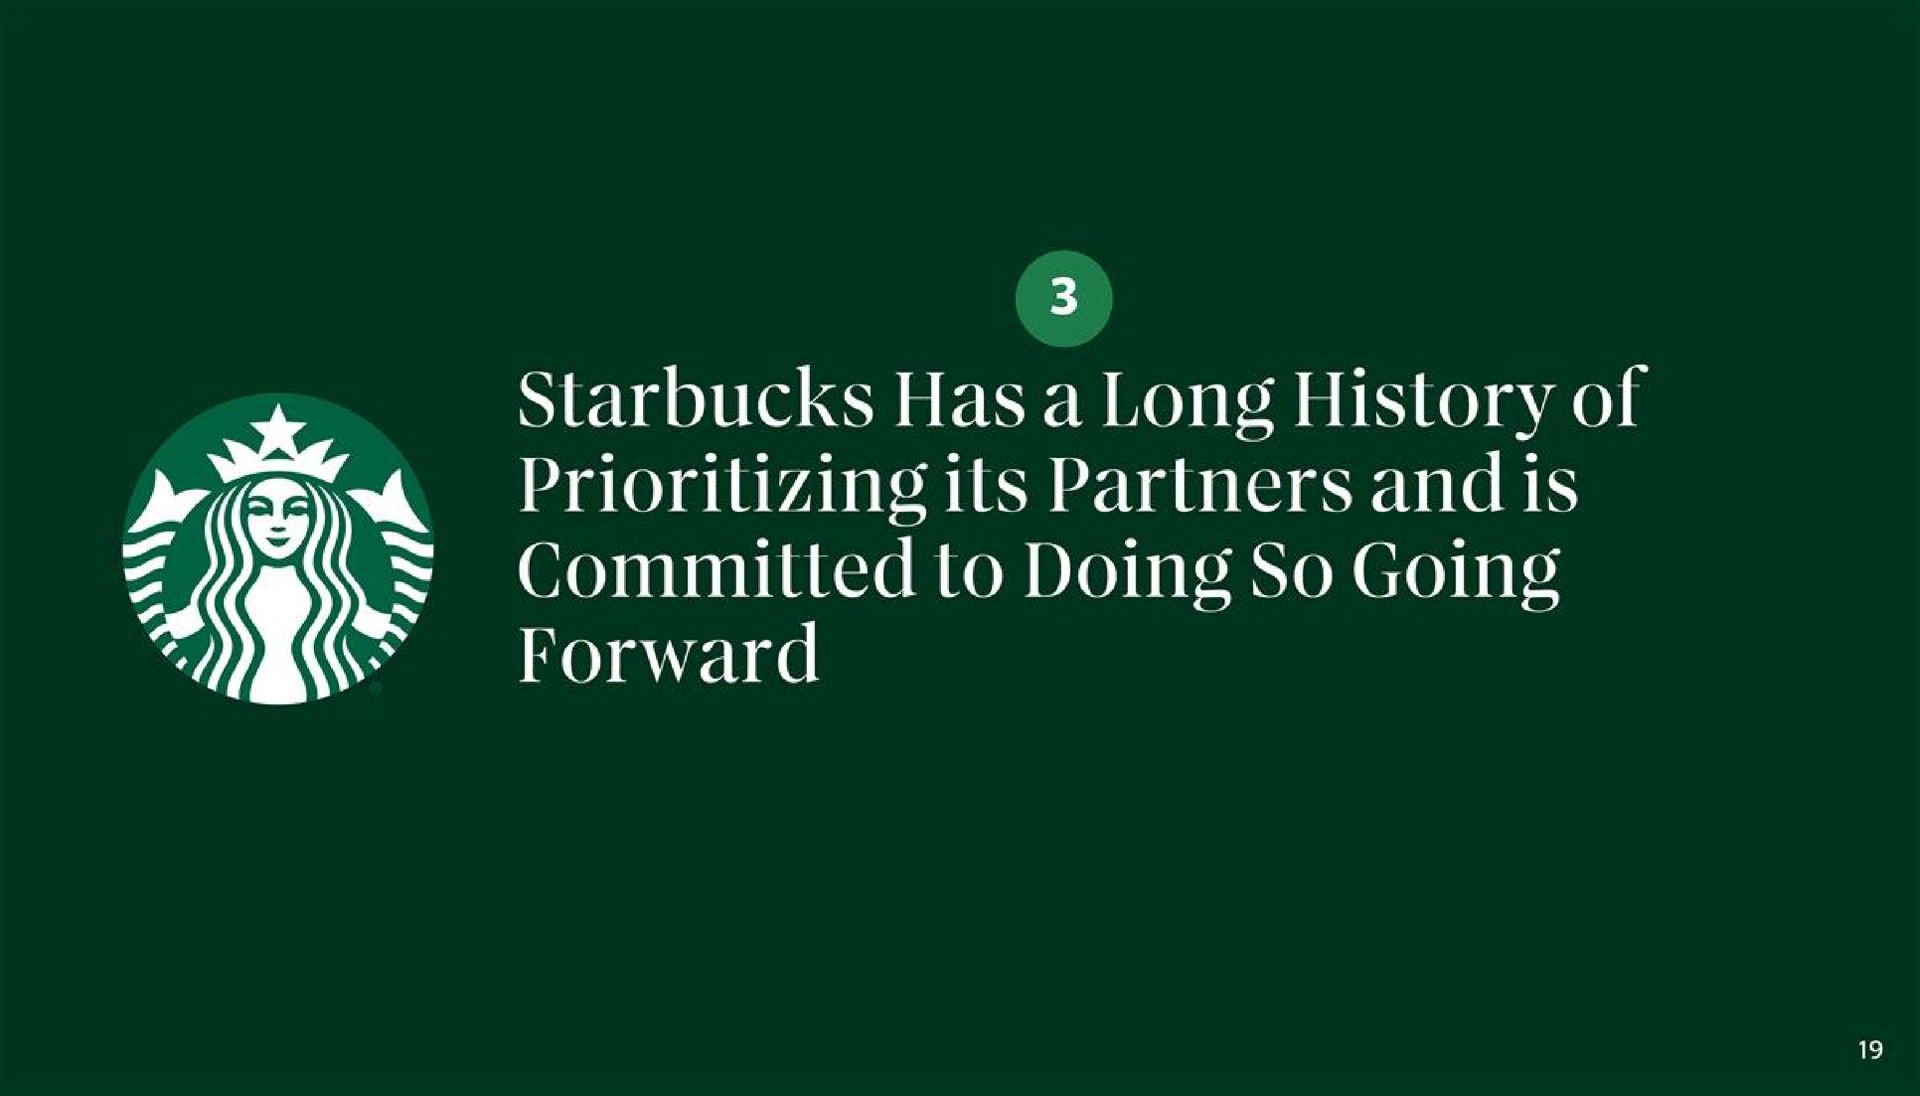 has a long history of its partners and is committed to doing so going forward | Starbucks